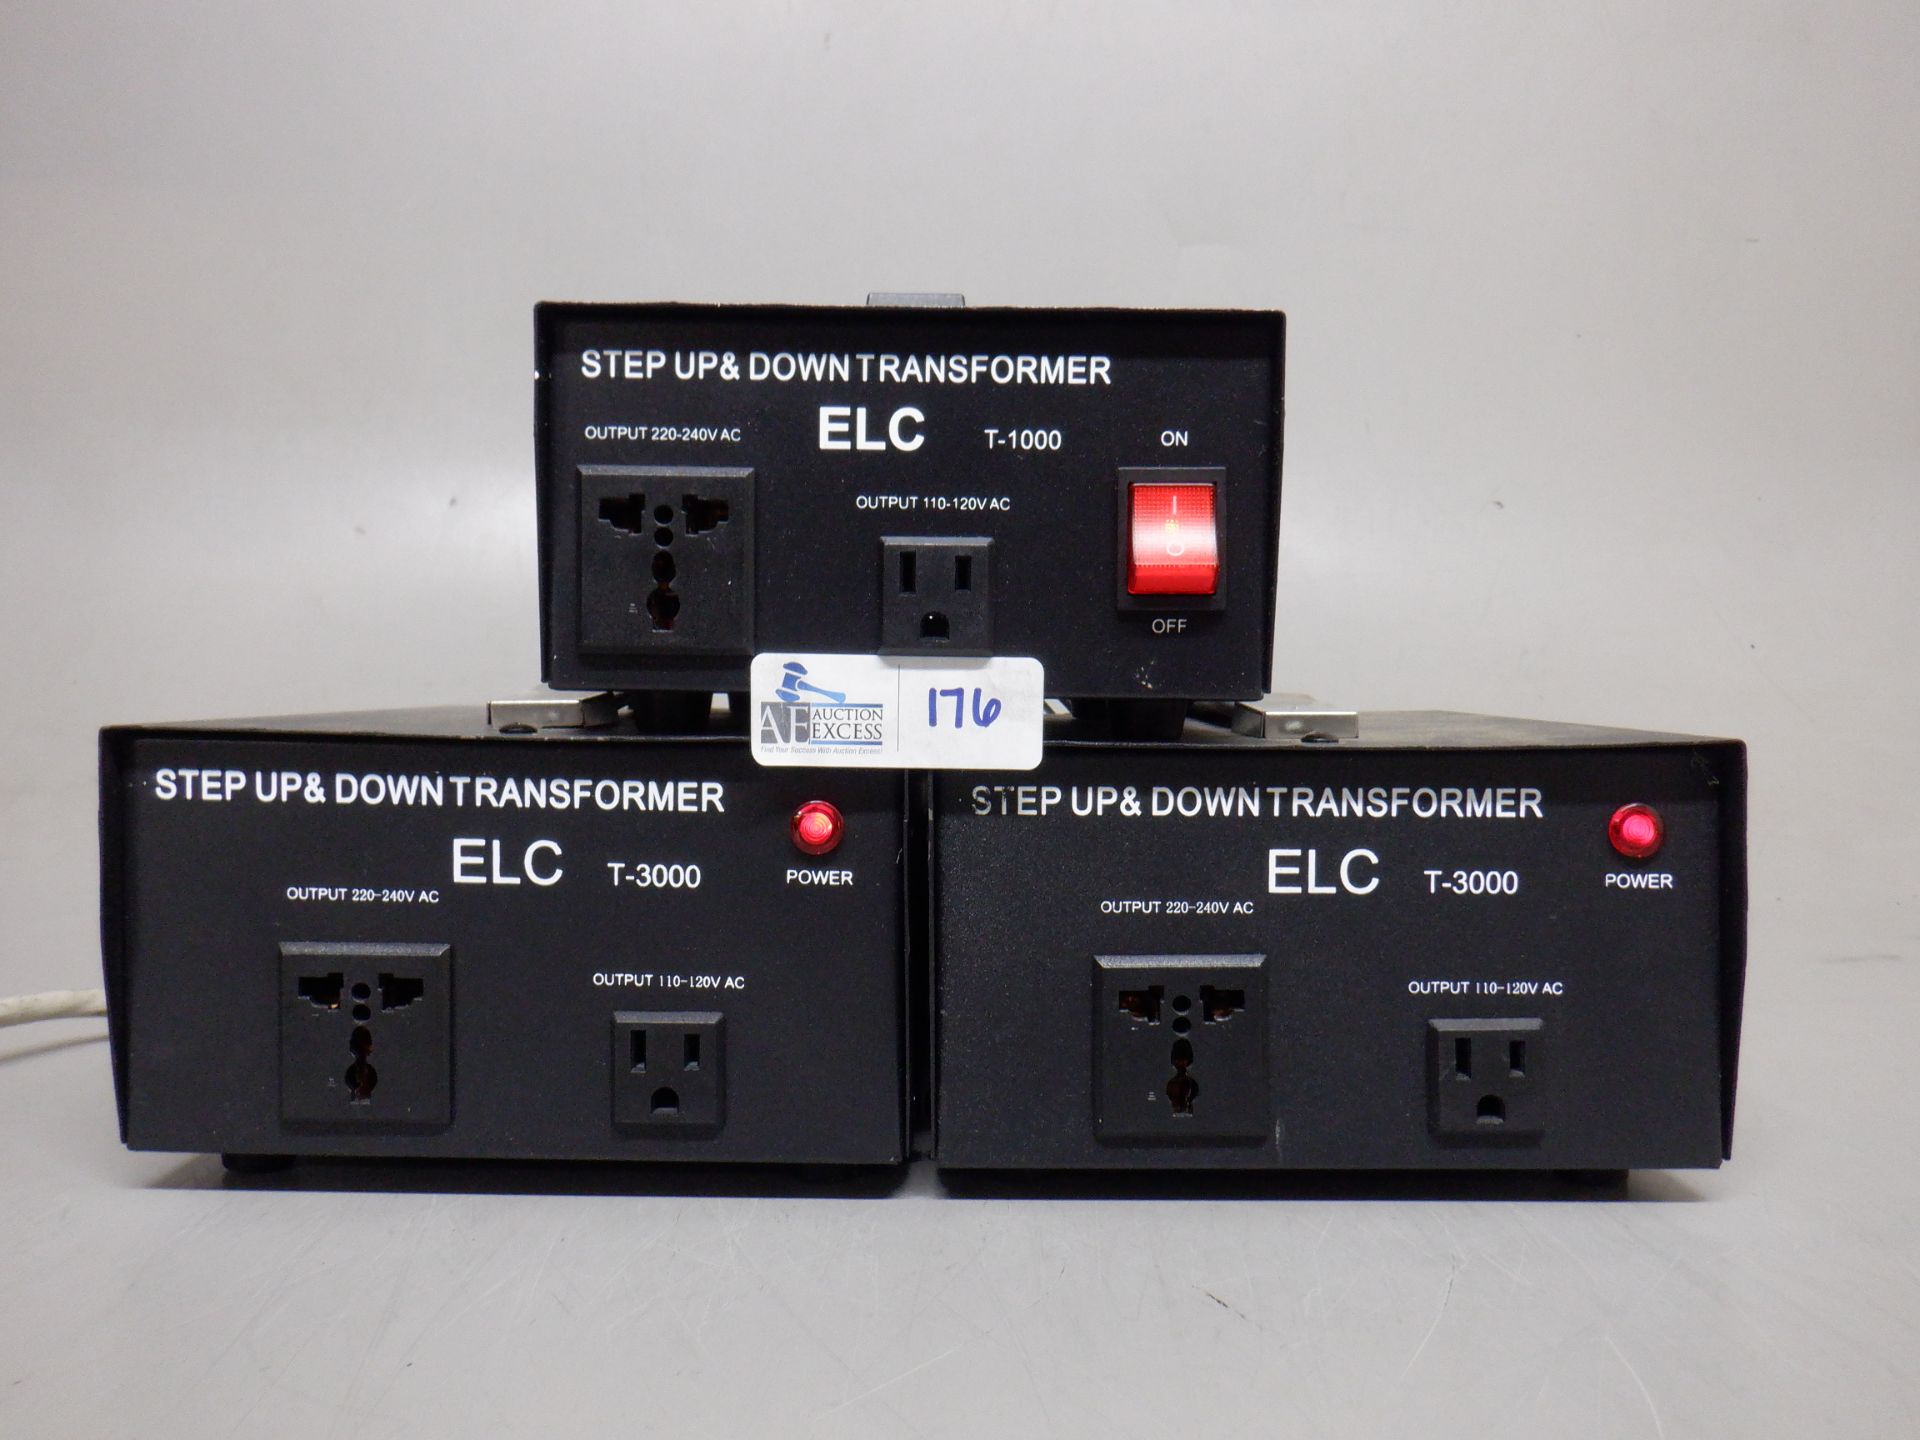 LOT OF 3 ELC STEP UP & DOWN TRANSFORMERS